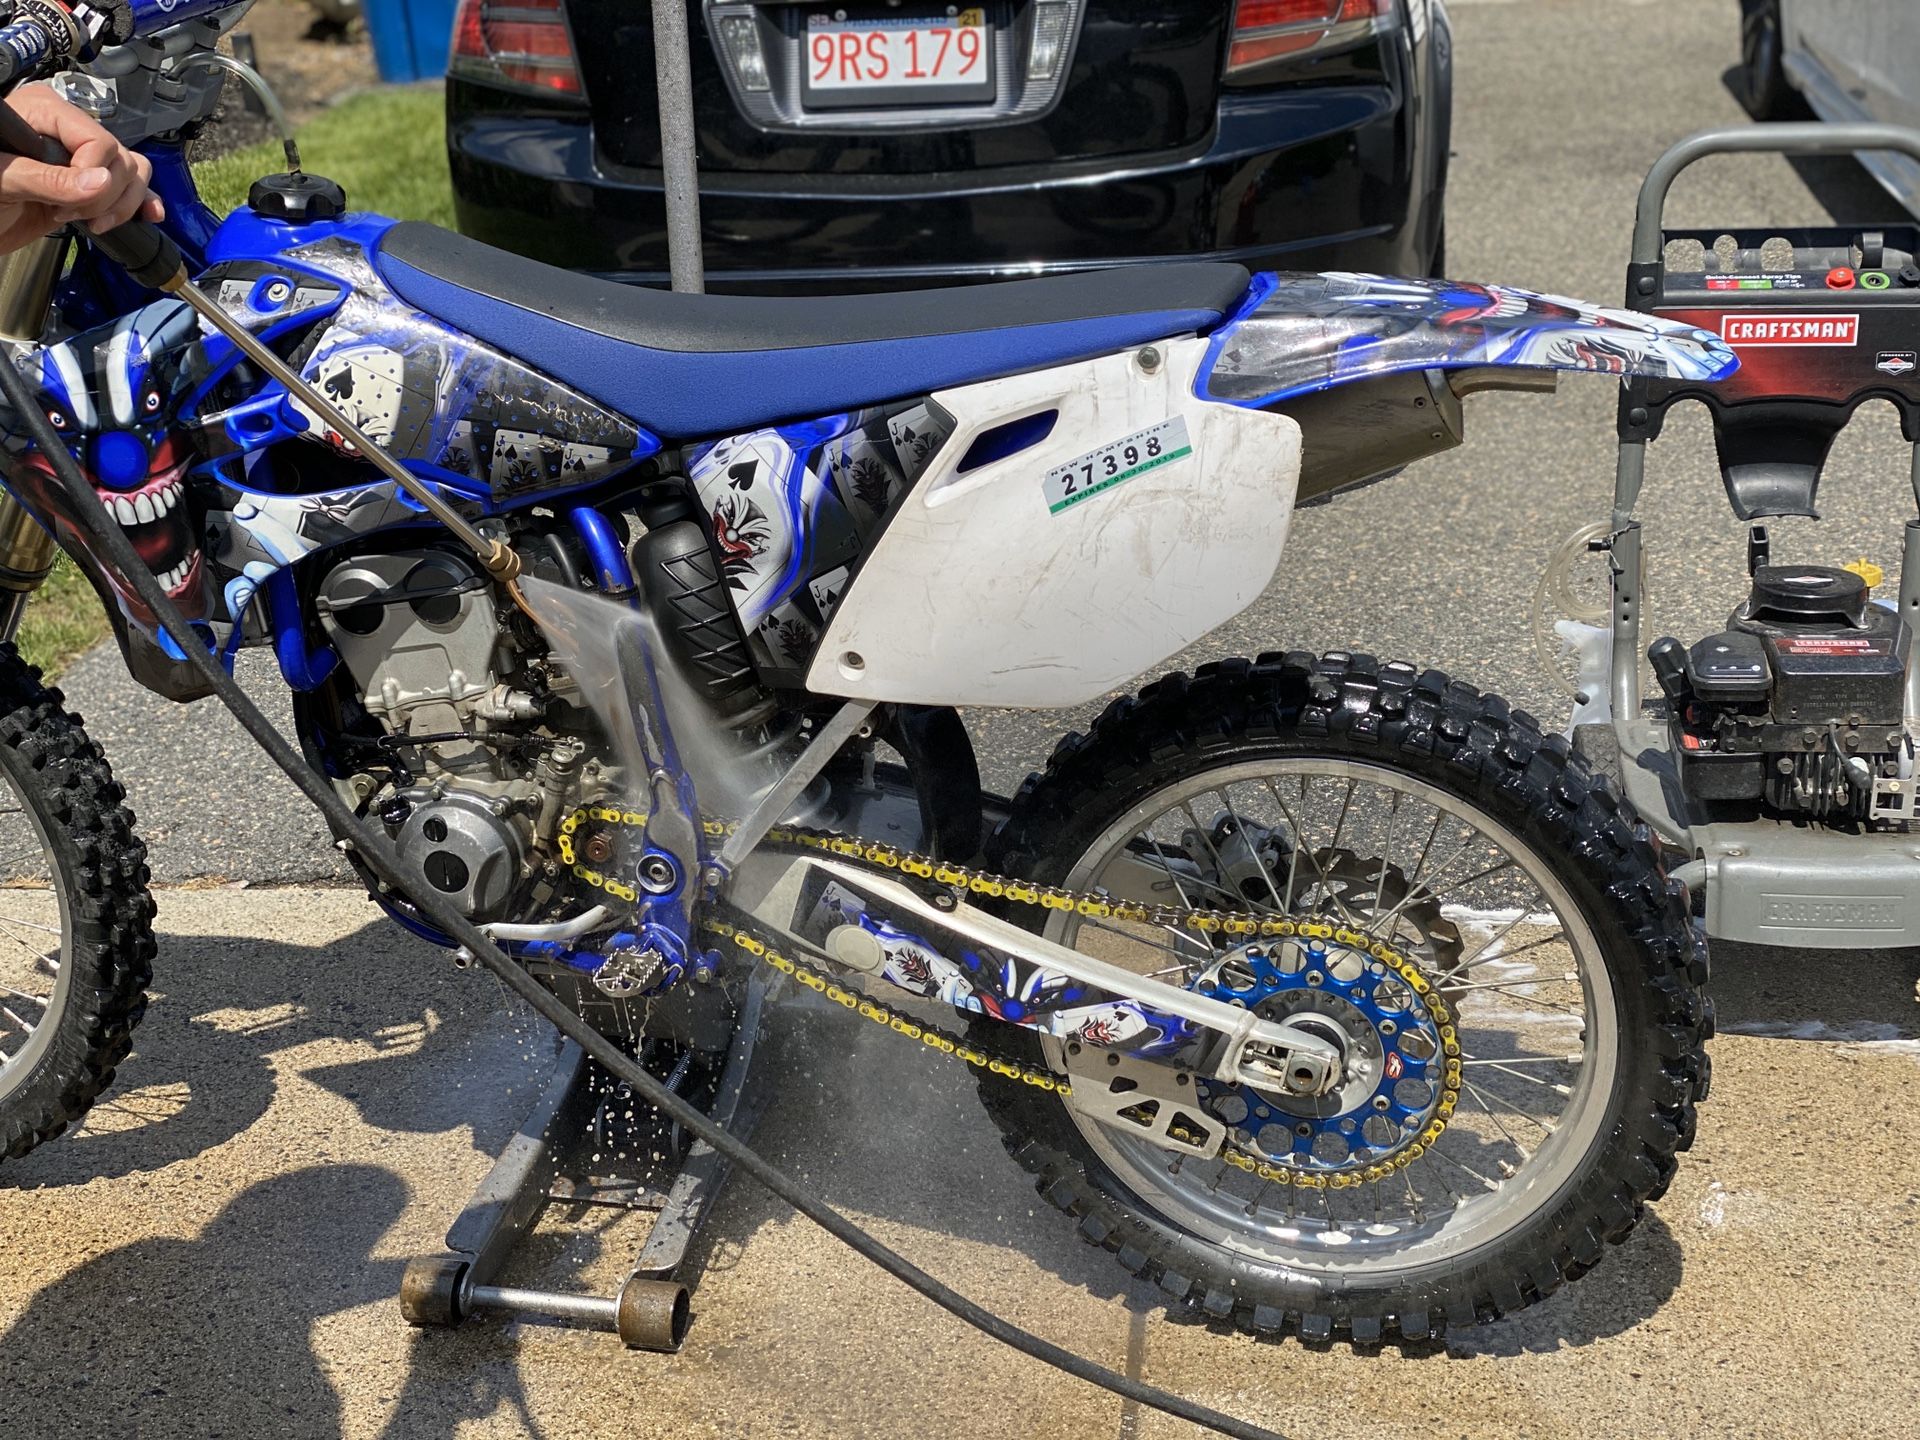 2005 Yamaha yz250f title in hand and bill of sale